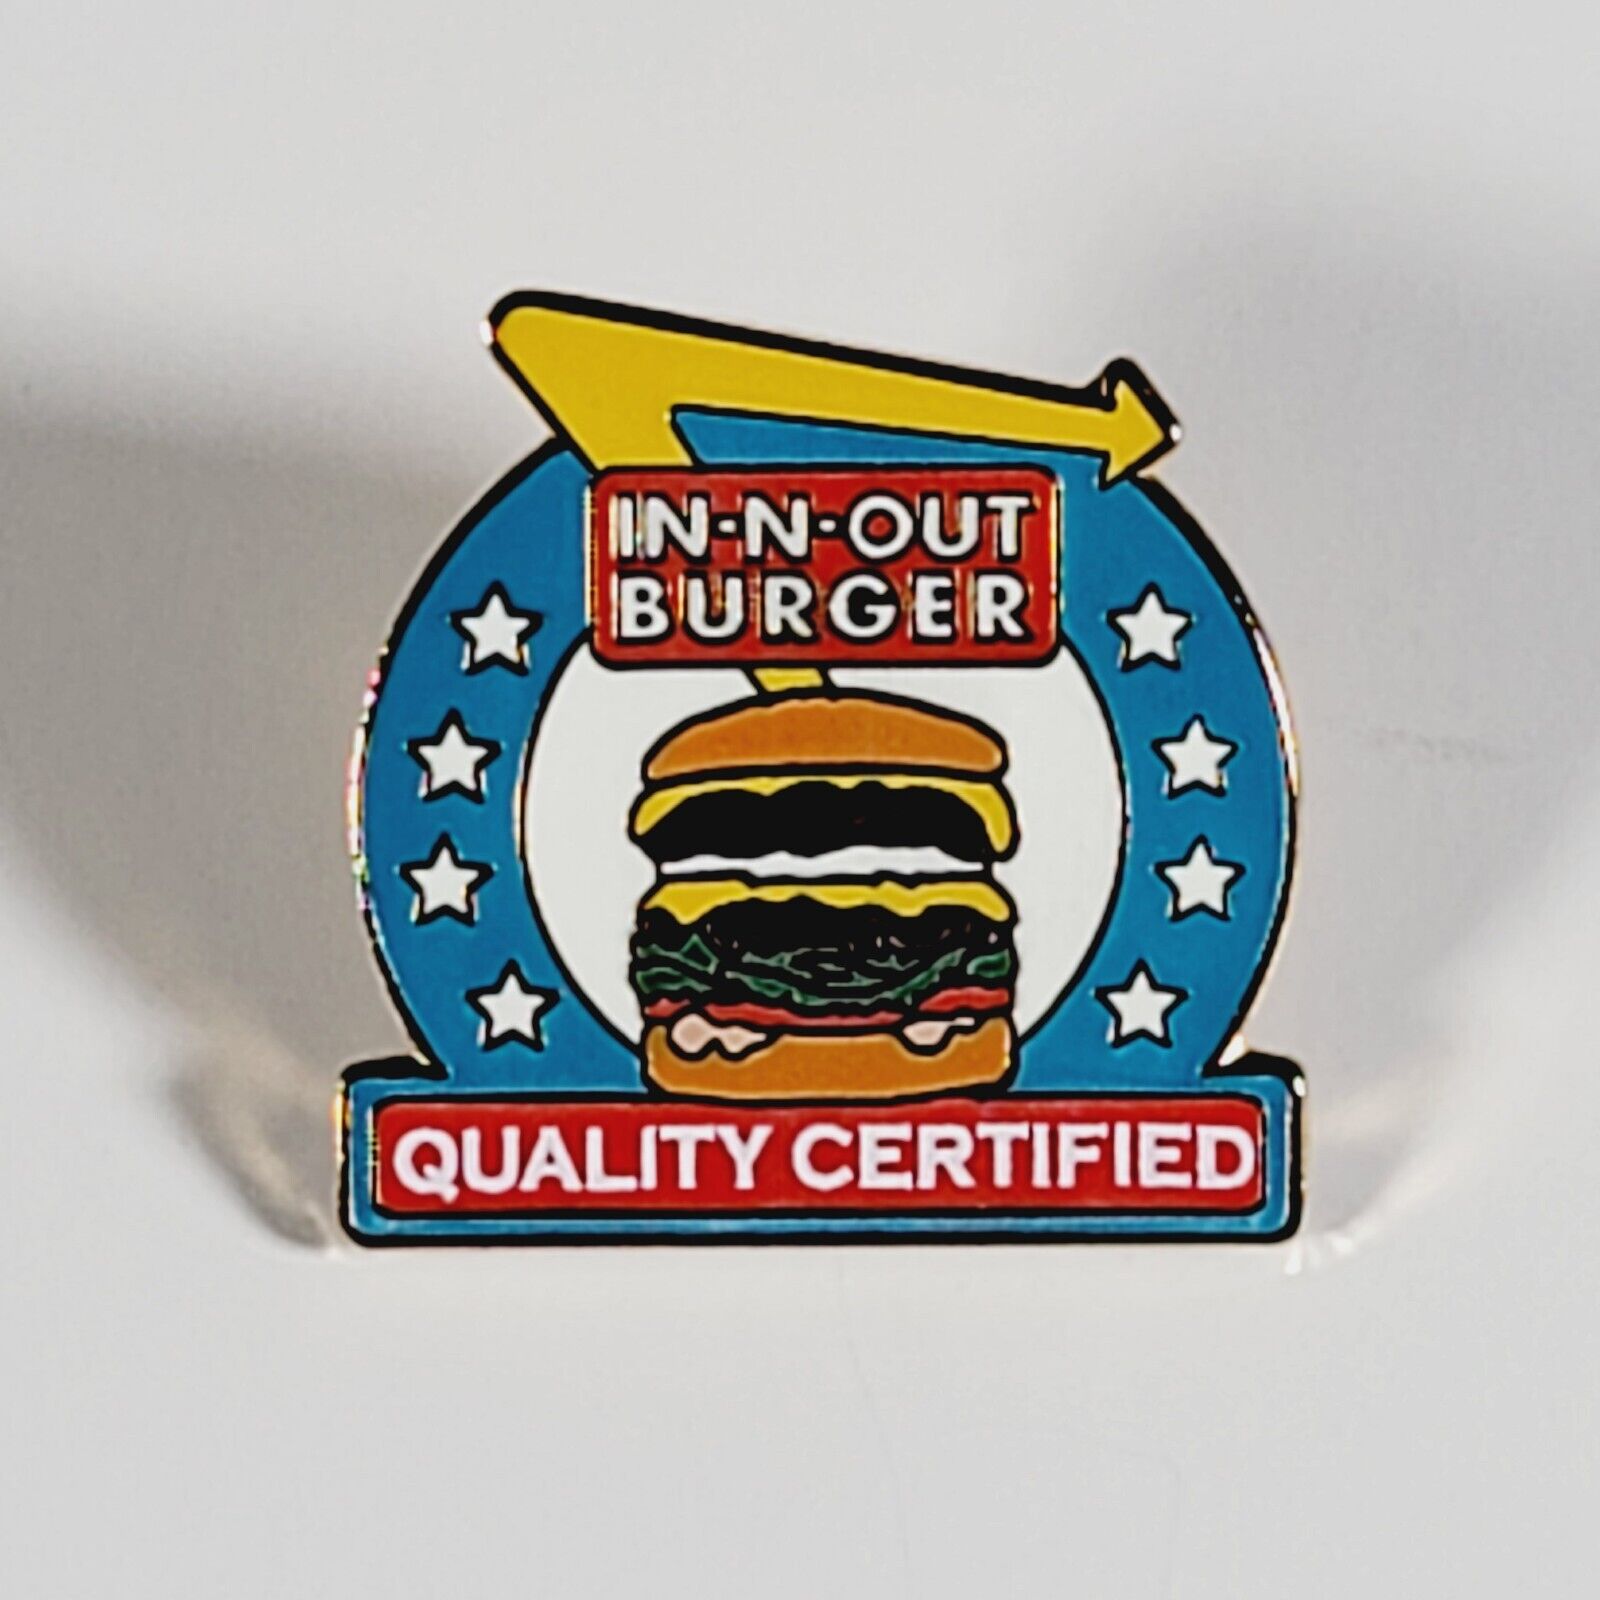 In-N-Out Quality Certified Burger Blue Enamel Advertising Lapel Pin